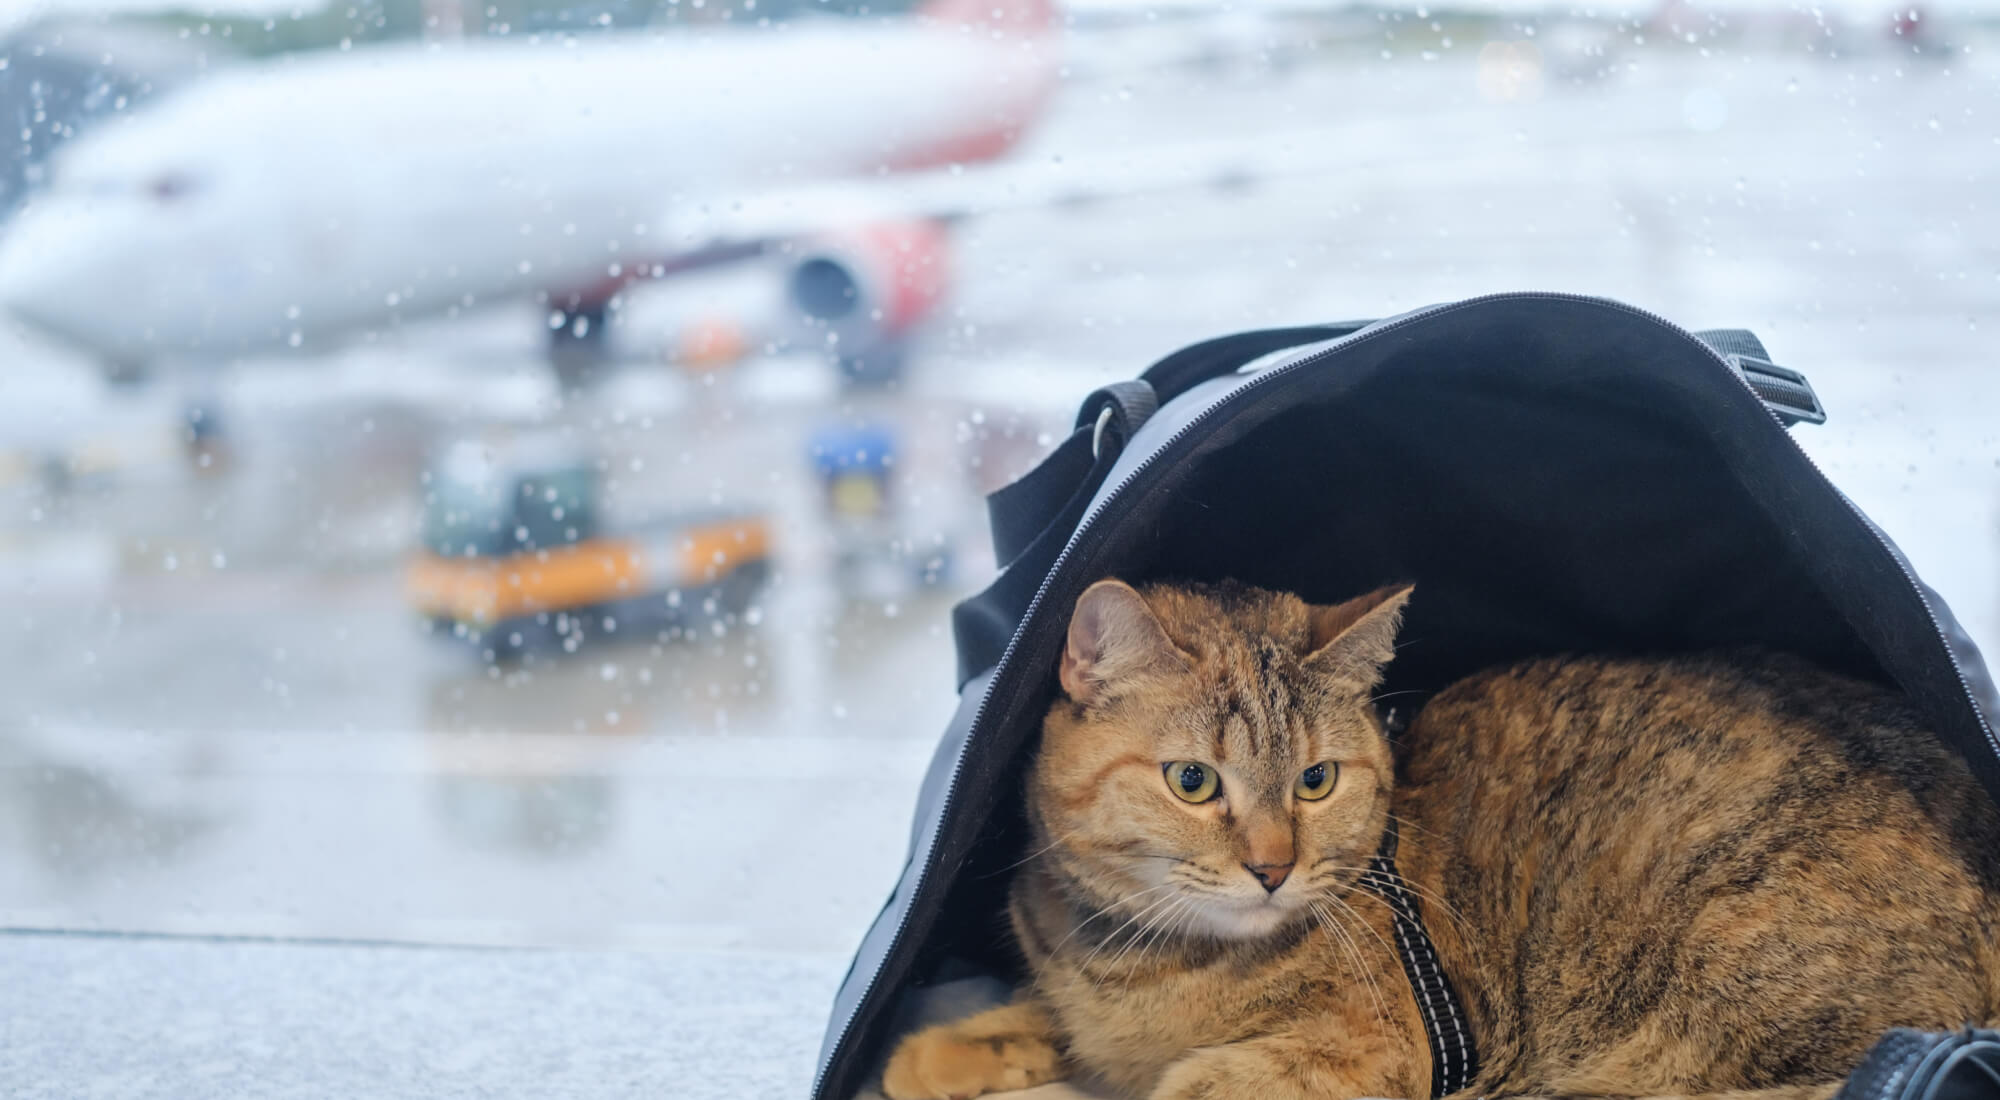 Cat in bag by airport window